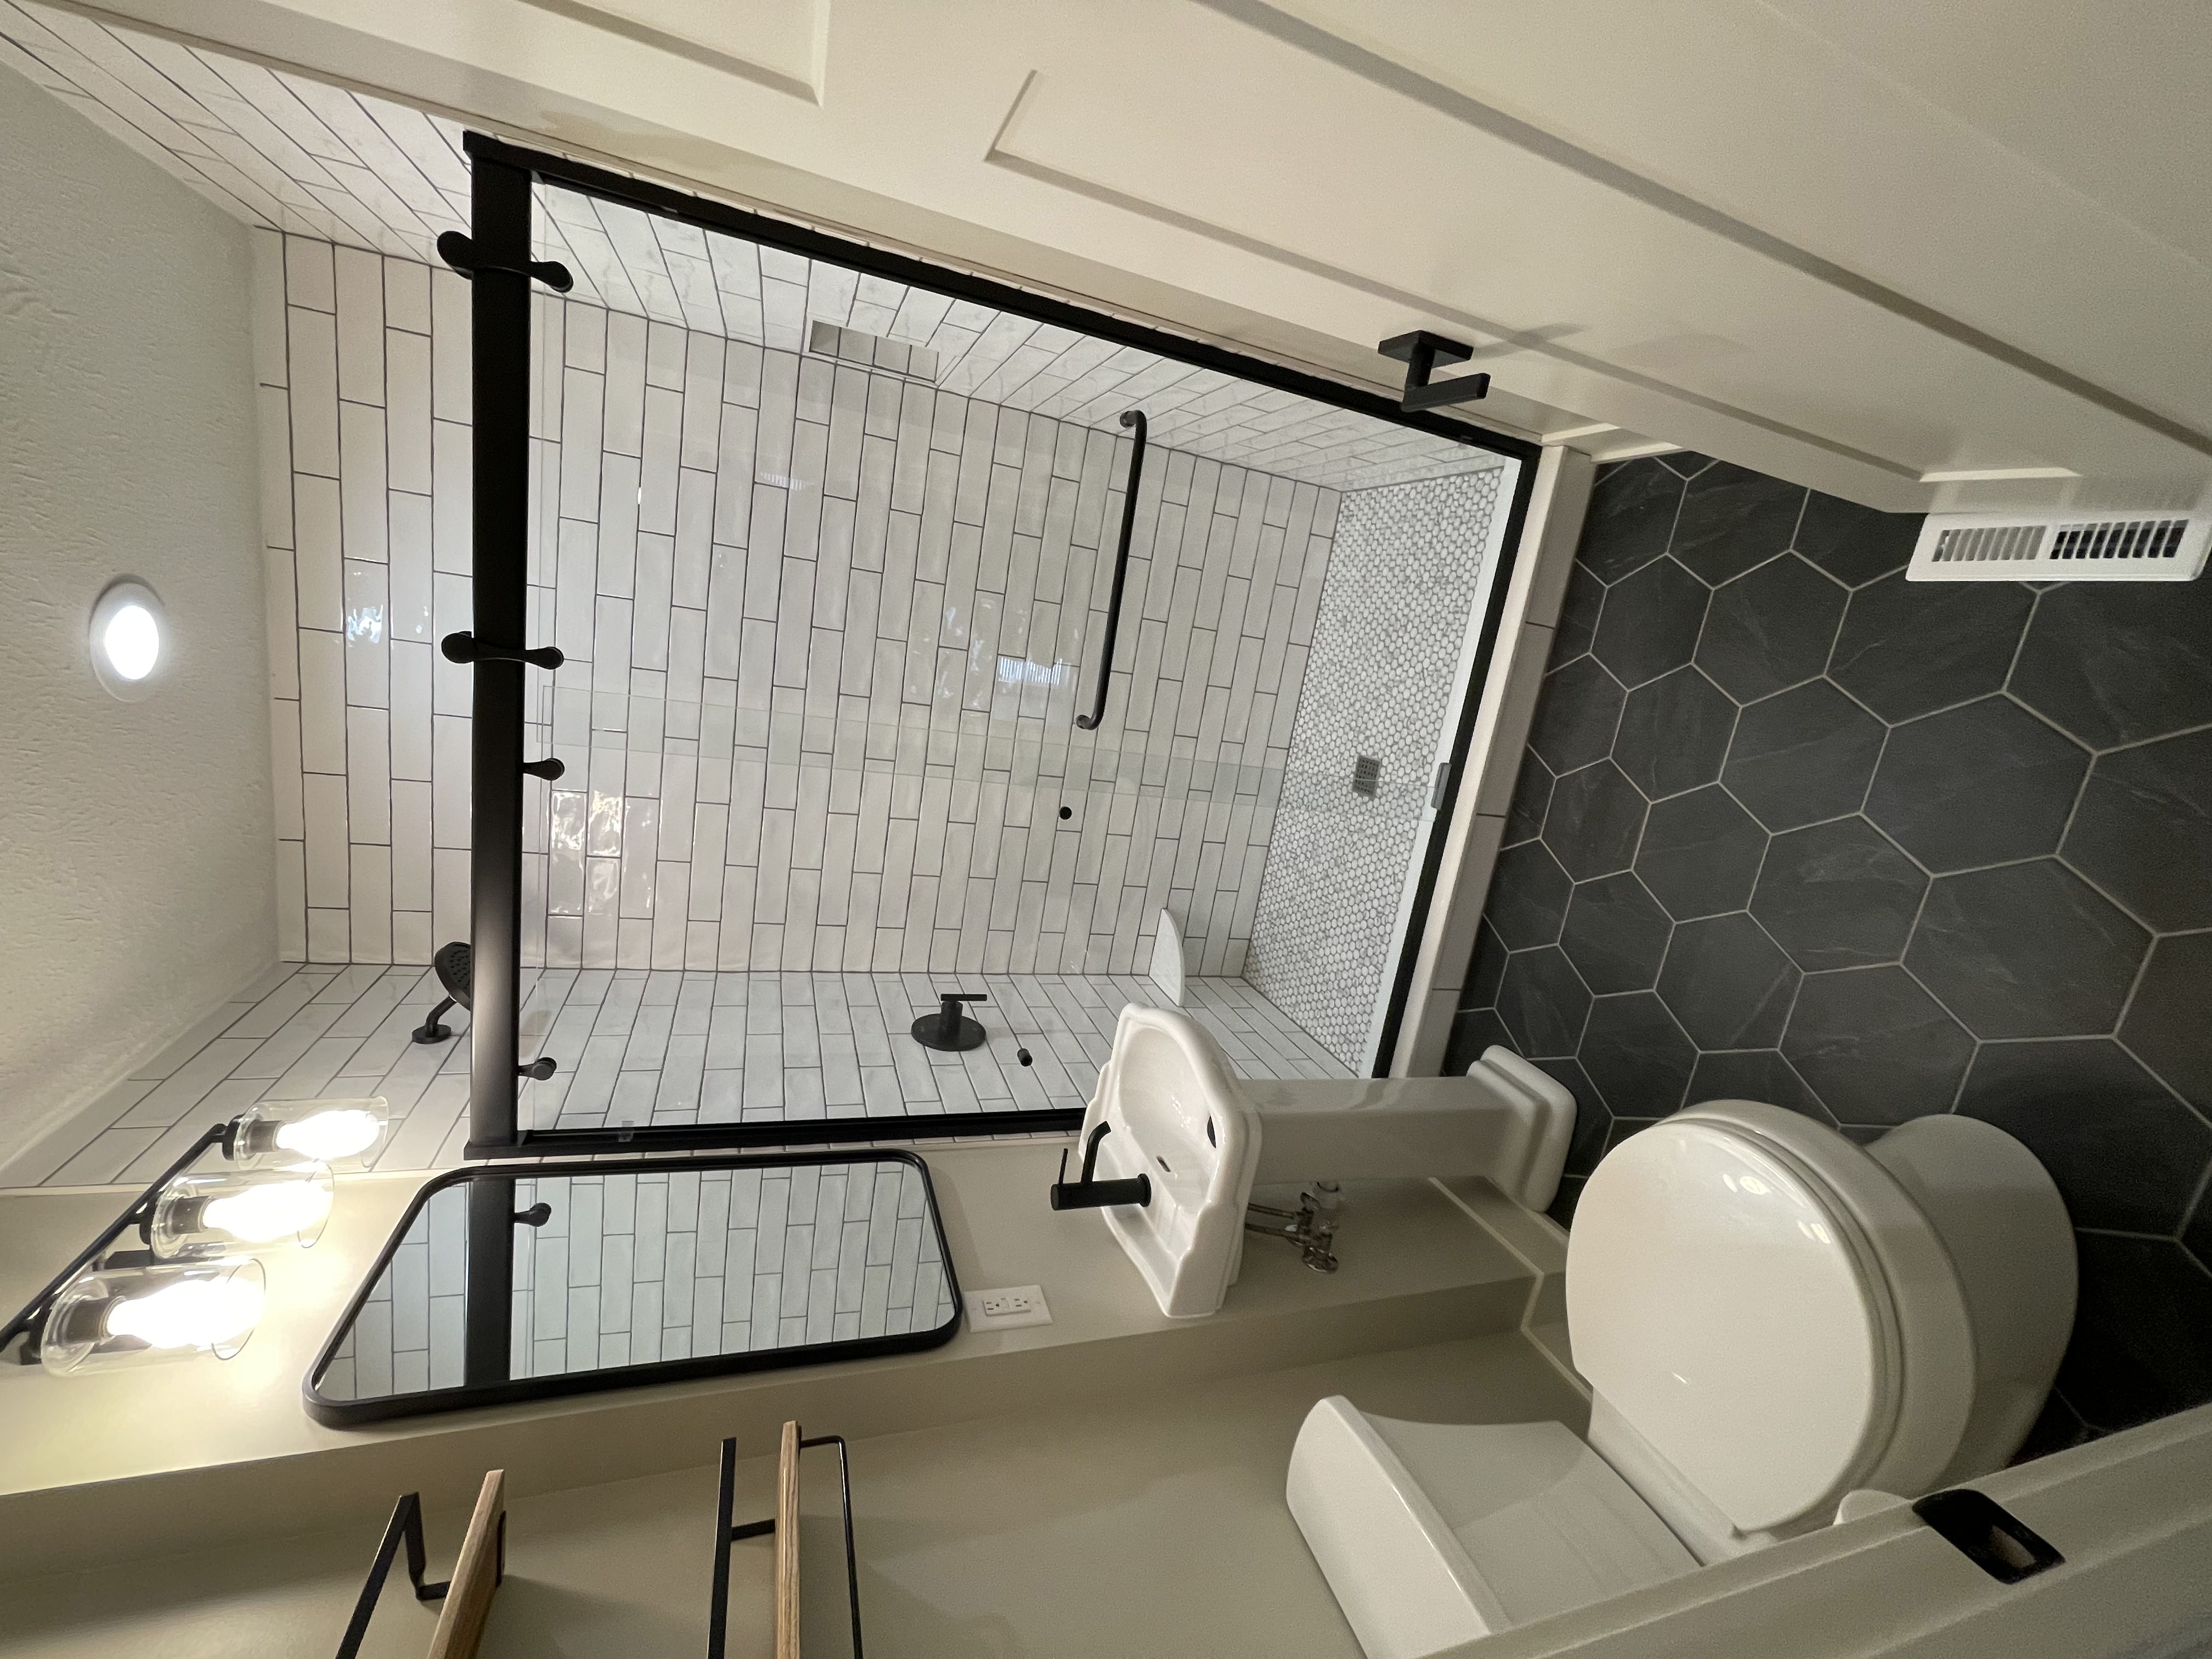 A modern bathroom with clear shower, white tile on of walls, and black tile on the floor